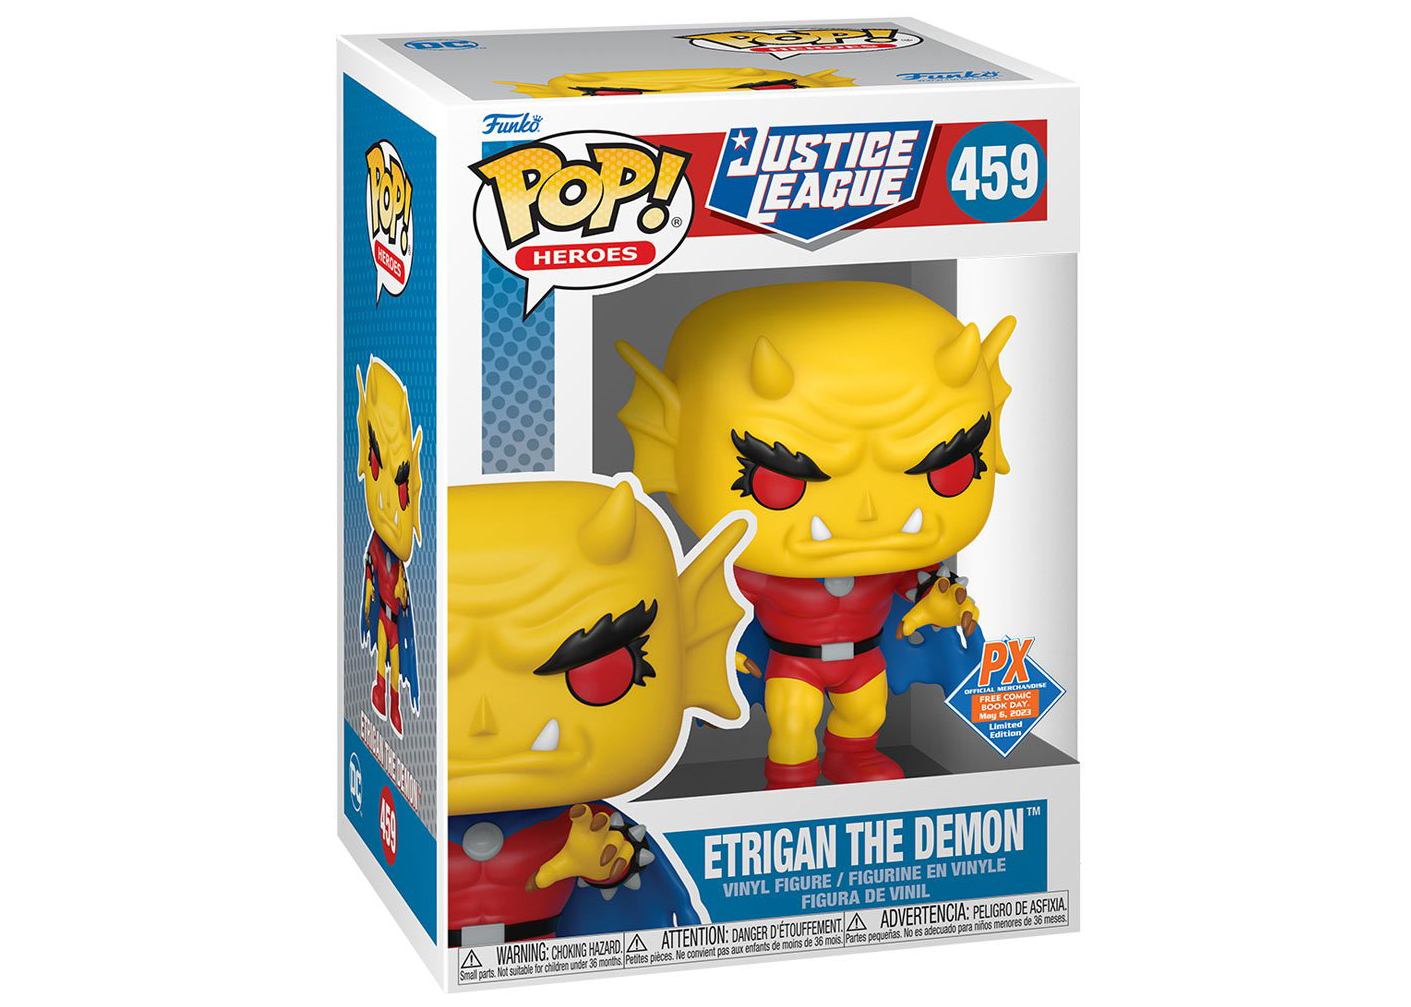 Funko Pop! Heroes Justice League Etrigan the Demon PX Previews Free Comic  Book Day Exclusive Figure #459